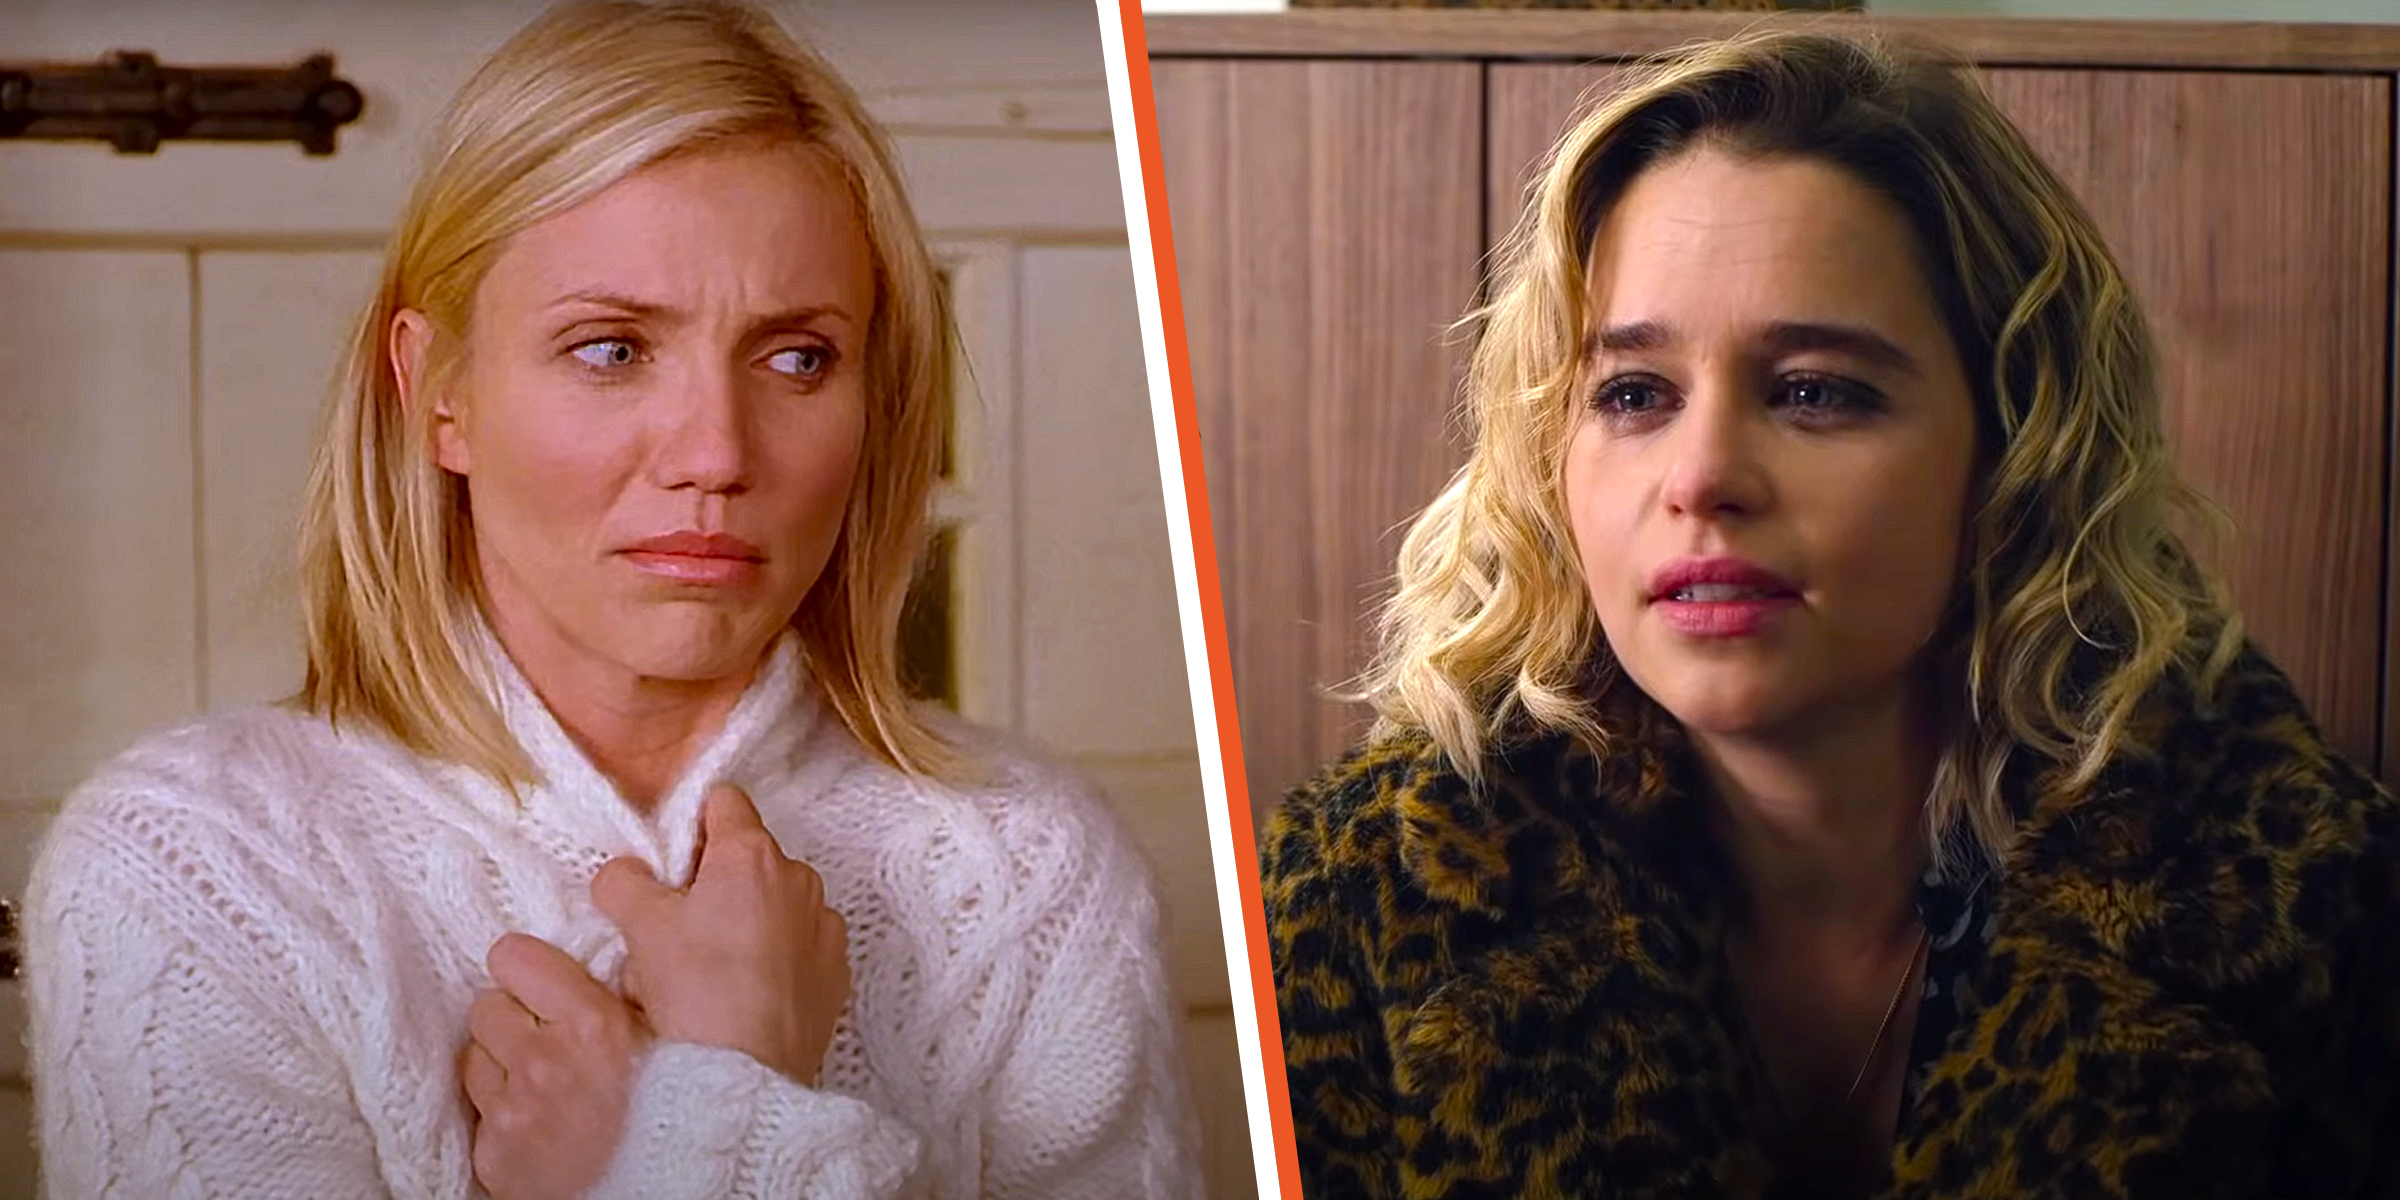 Cameron Diaz in "The Holiday" | Emilia Clarke in "Last Christmas" | Source: Youtube/sonypictures | Youtube/UniversalPictures